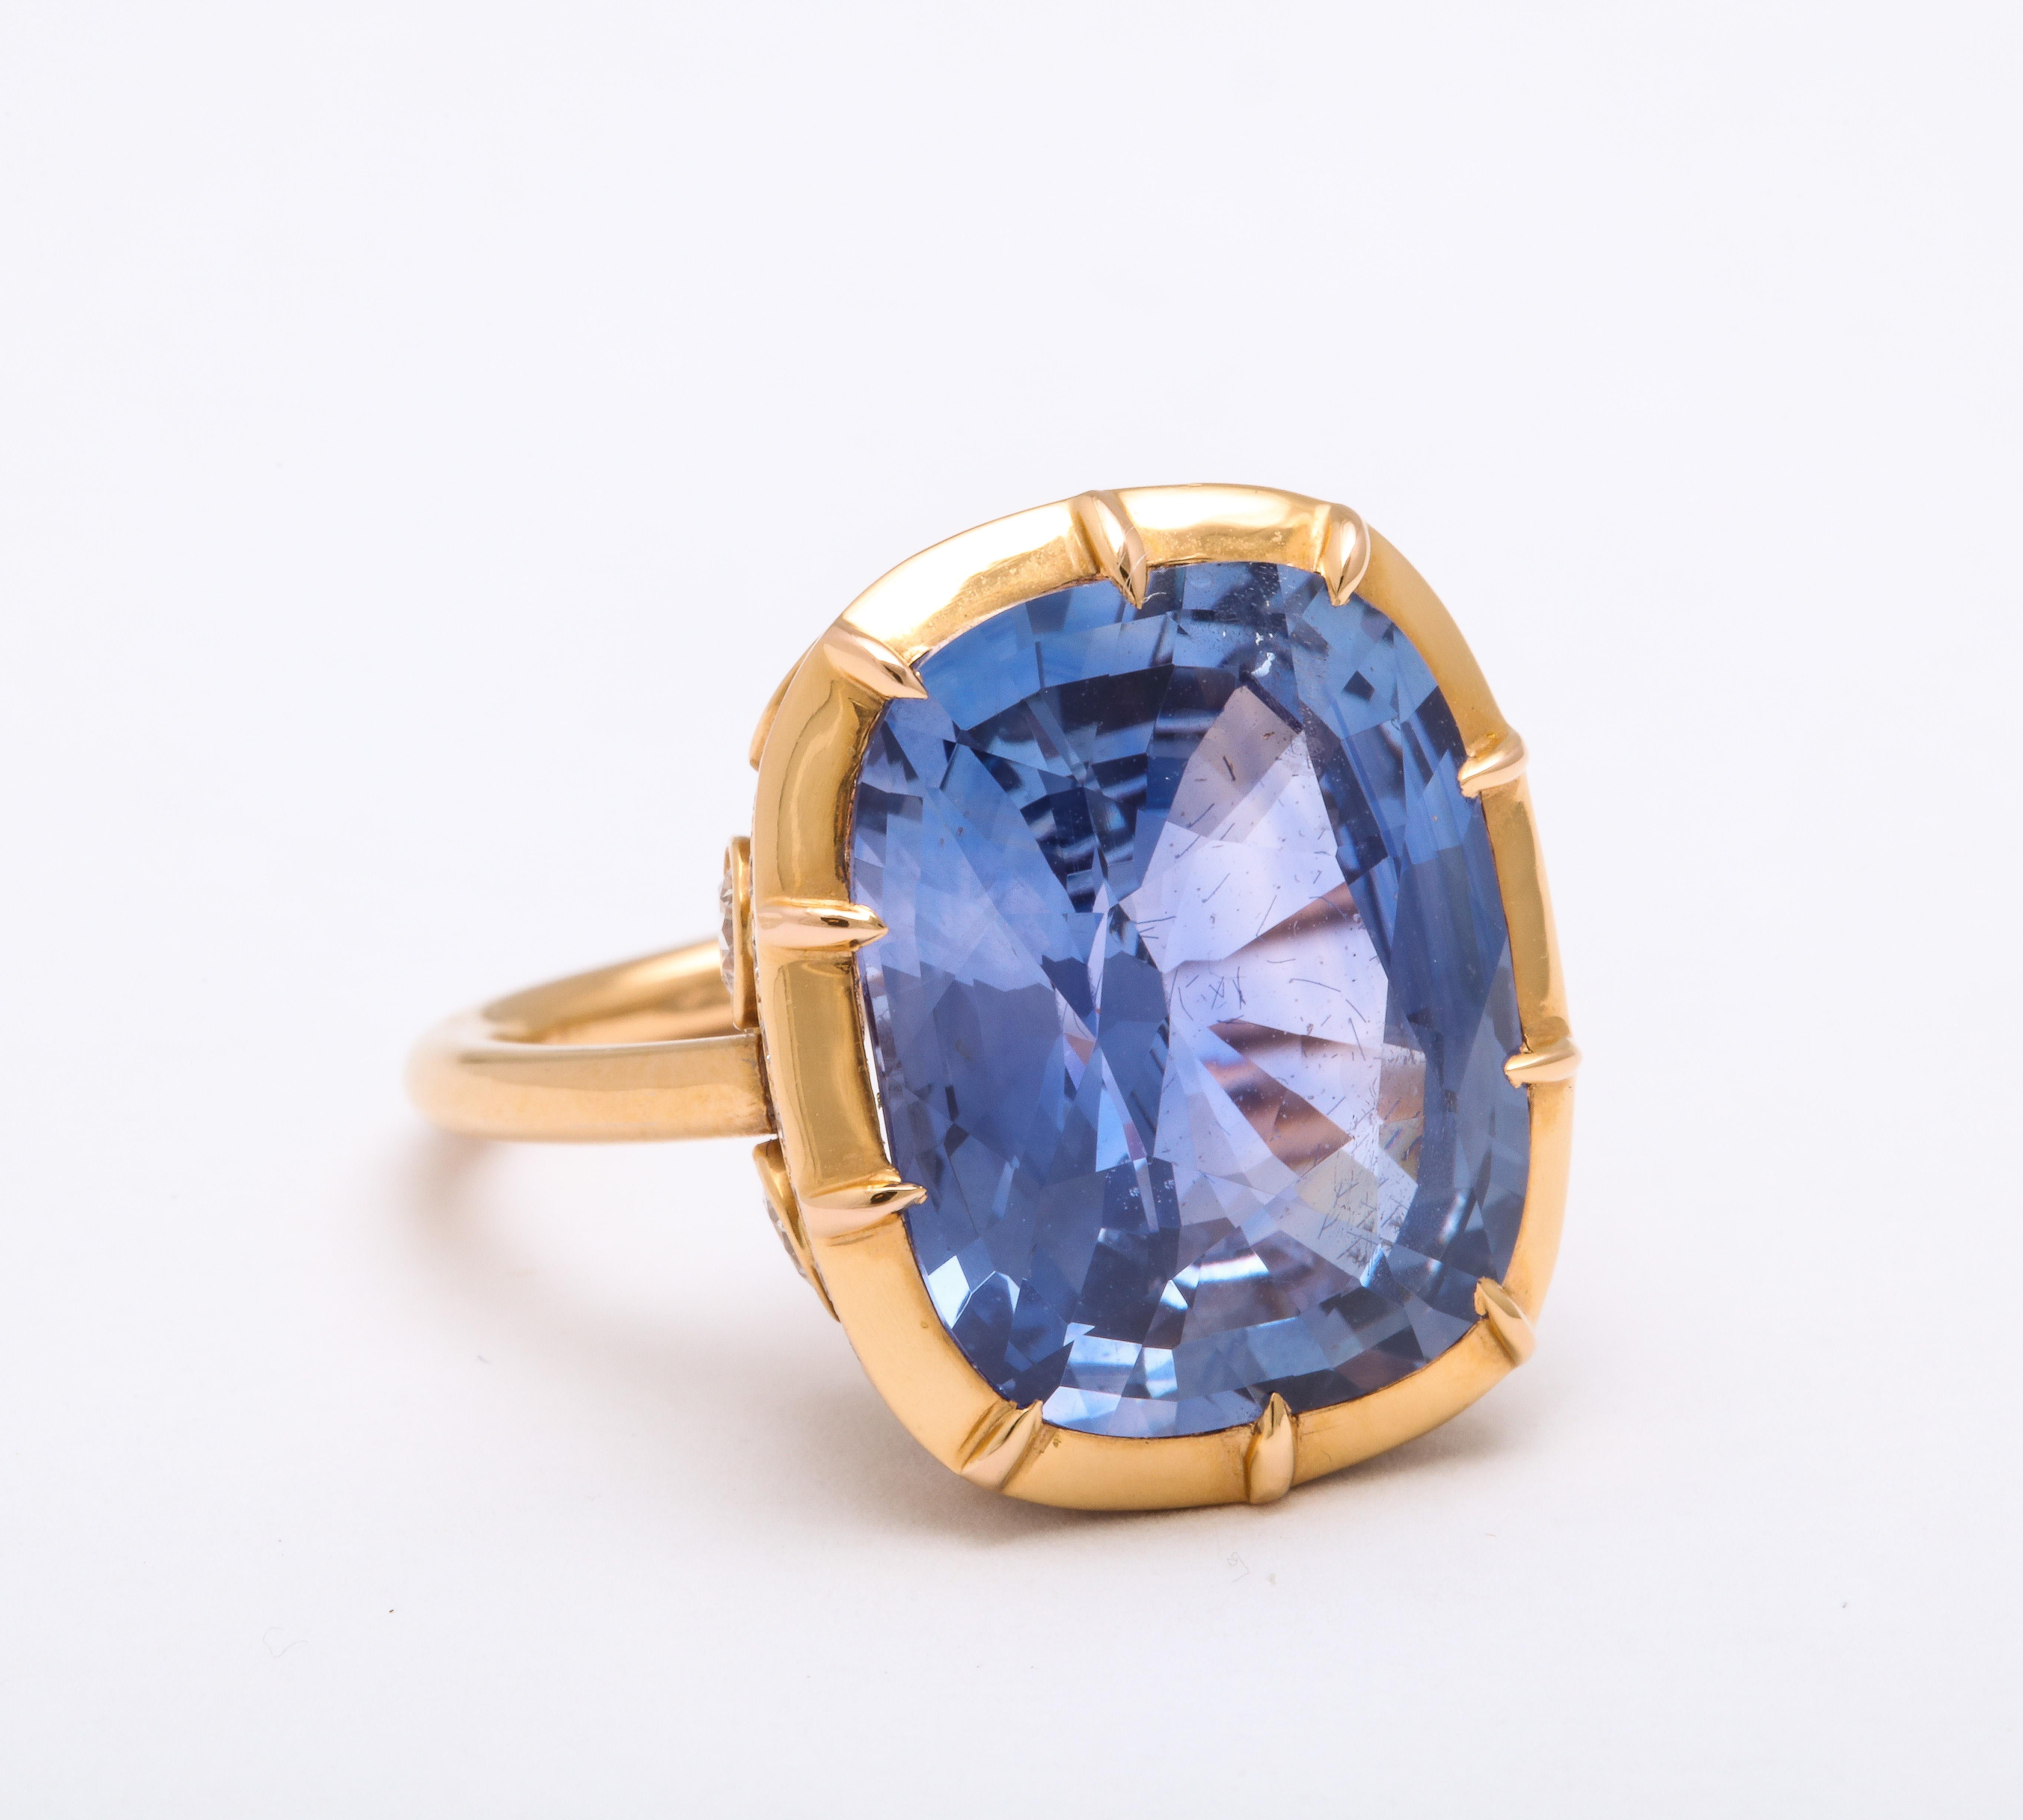 This Contemporary Georgian Ring showcases a cushion cut untreated @15.0 its tw Ceylon Sapphire set in fine white full cut diamonds and yellow gold.

Materials:
7.4 dwt
18K yellow gold 

Stones:
Ceylon Sapphire Cushion cut untreated @15.0 its tw
Fine